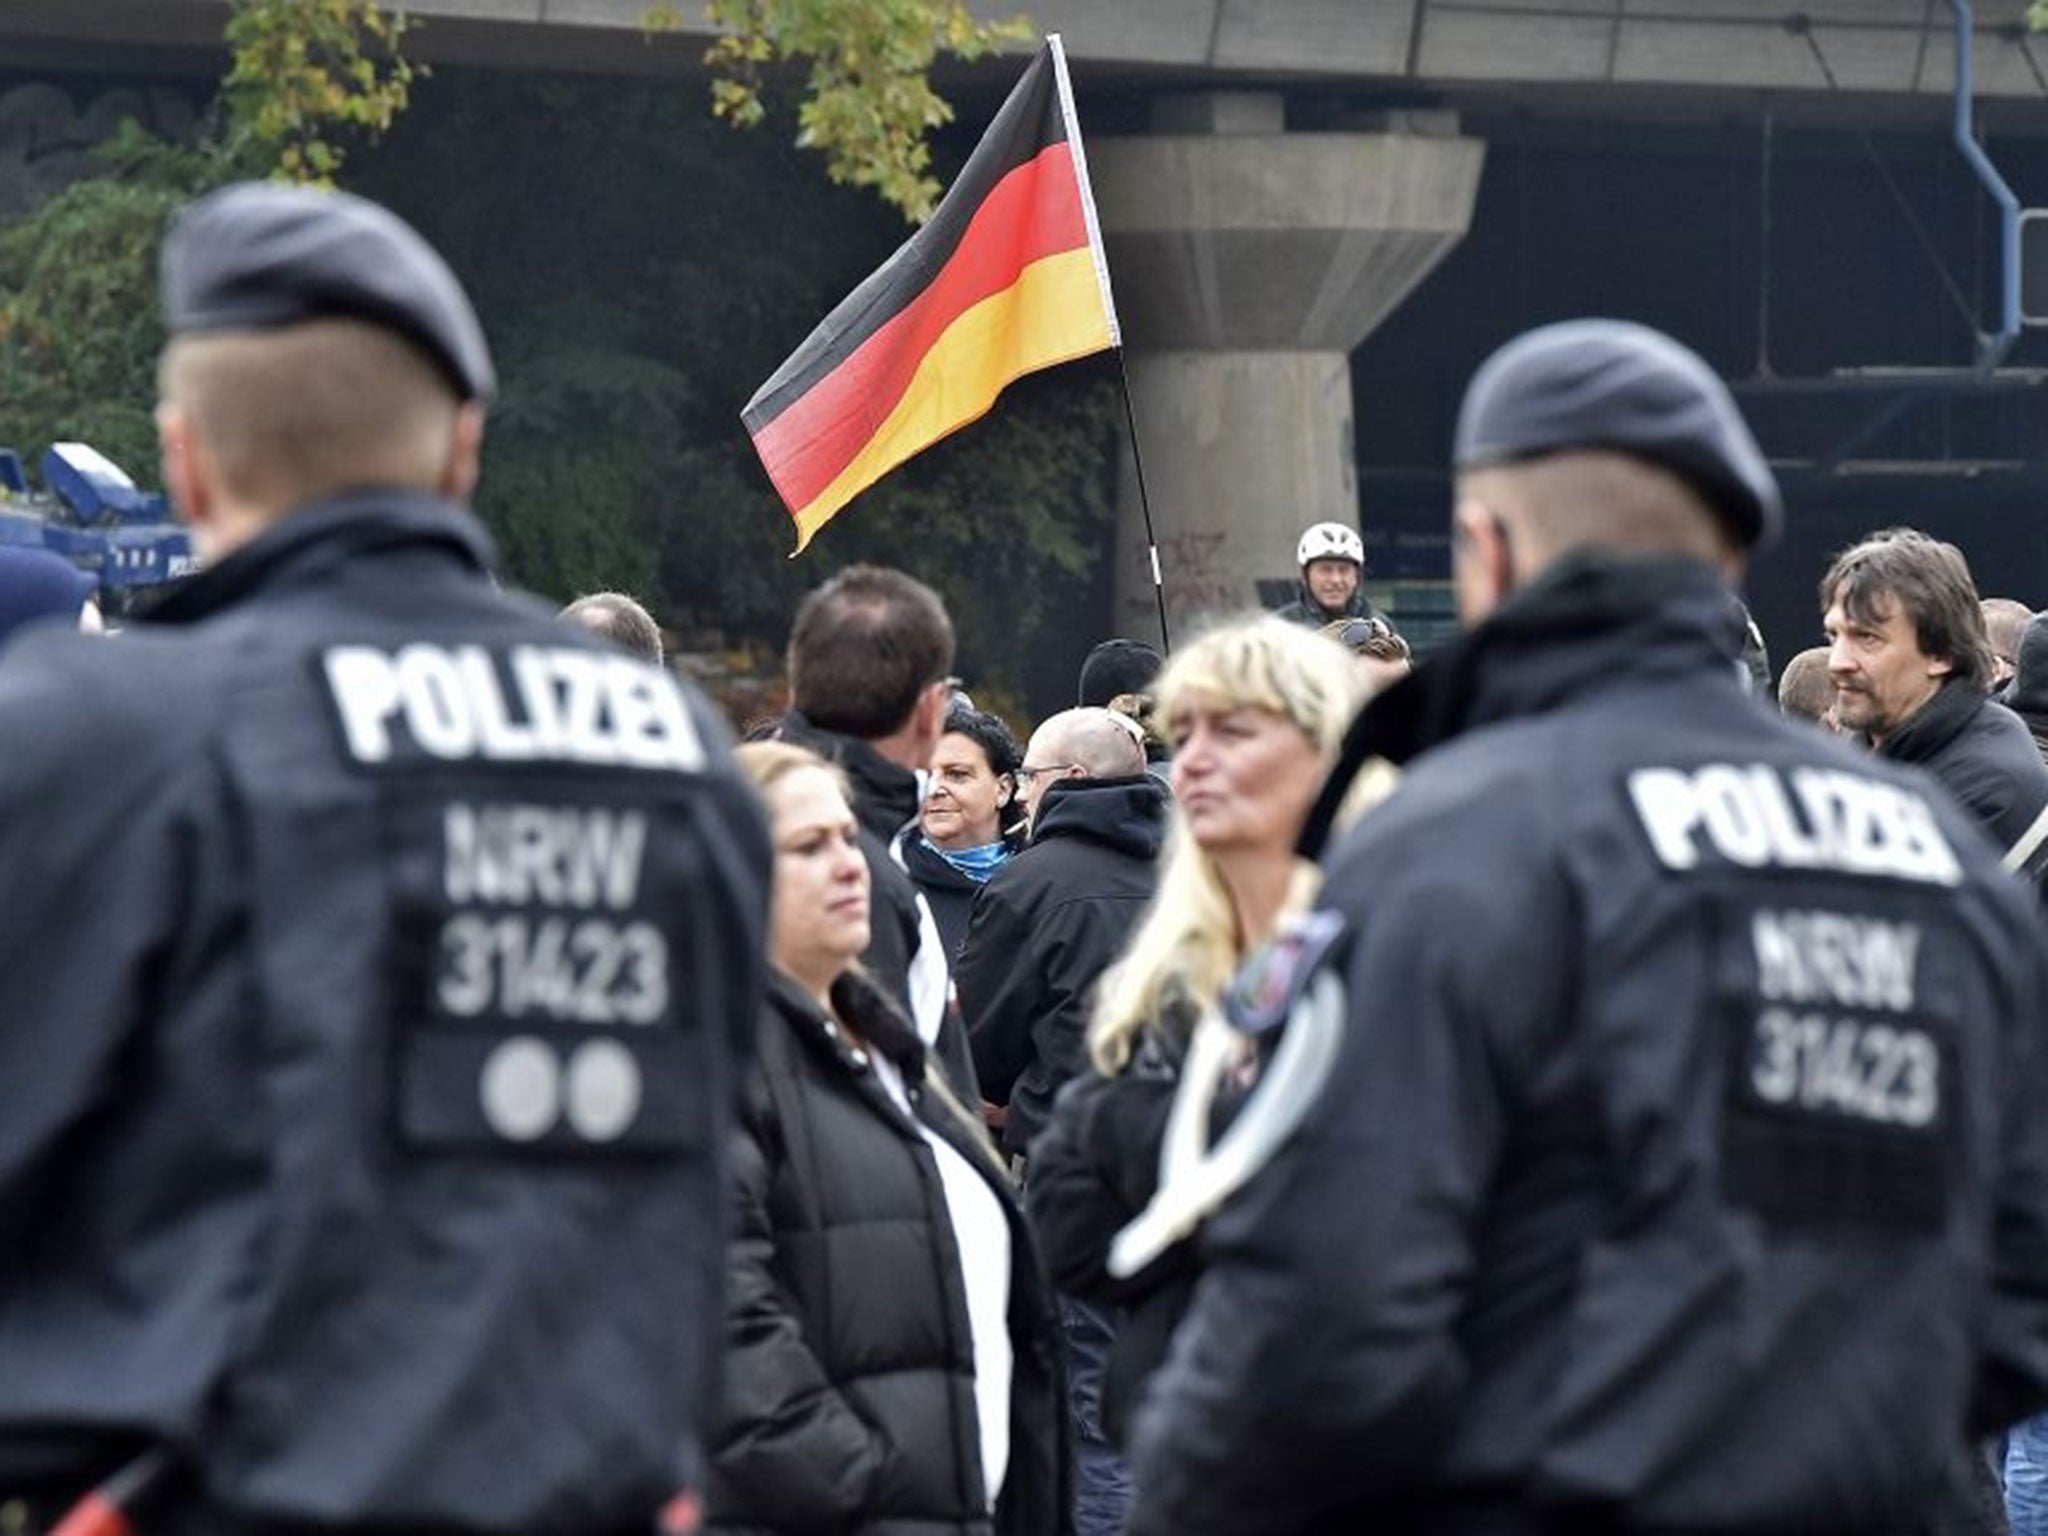 Far-right protestors hold a German flag as police secure streets in Cologne, Germany